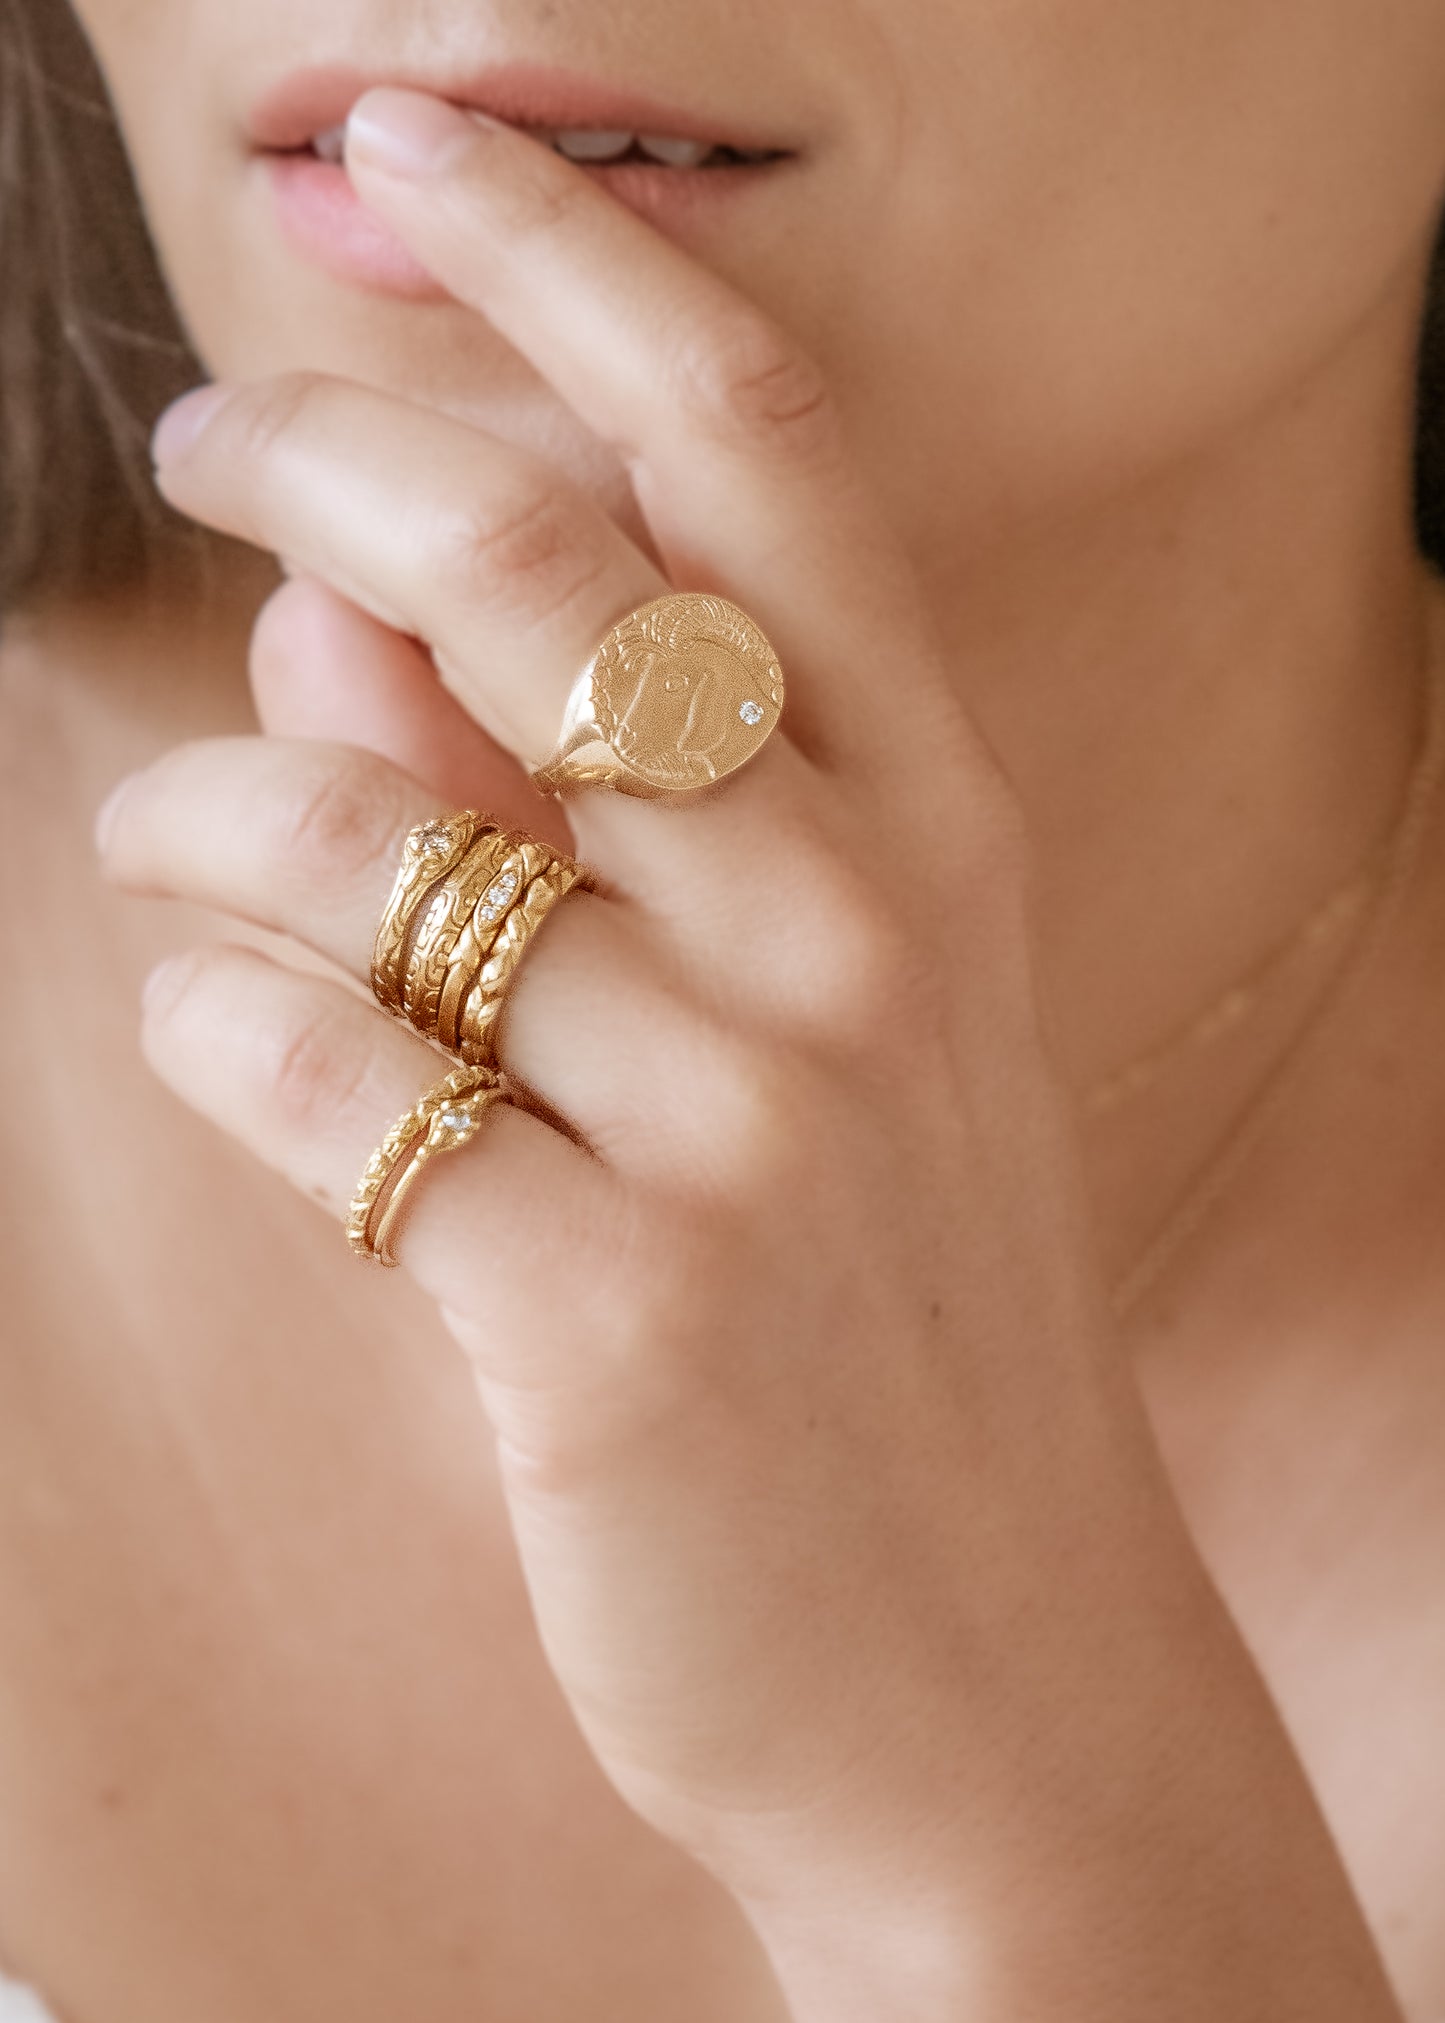 Inspired by winding roads that invite spontaneous adventure, the hand-detailed patterns in the Lain ring create a map for daydreams—a personal compass made of precious gold. 